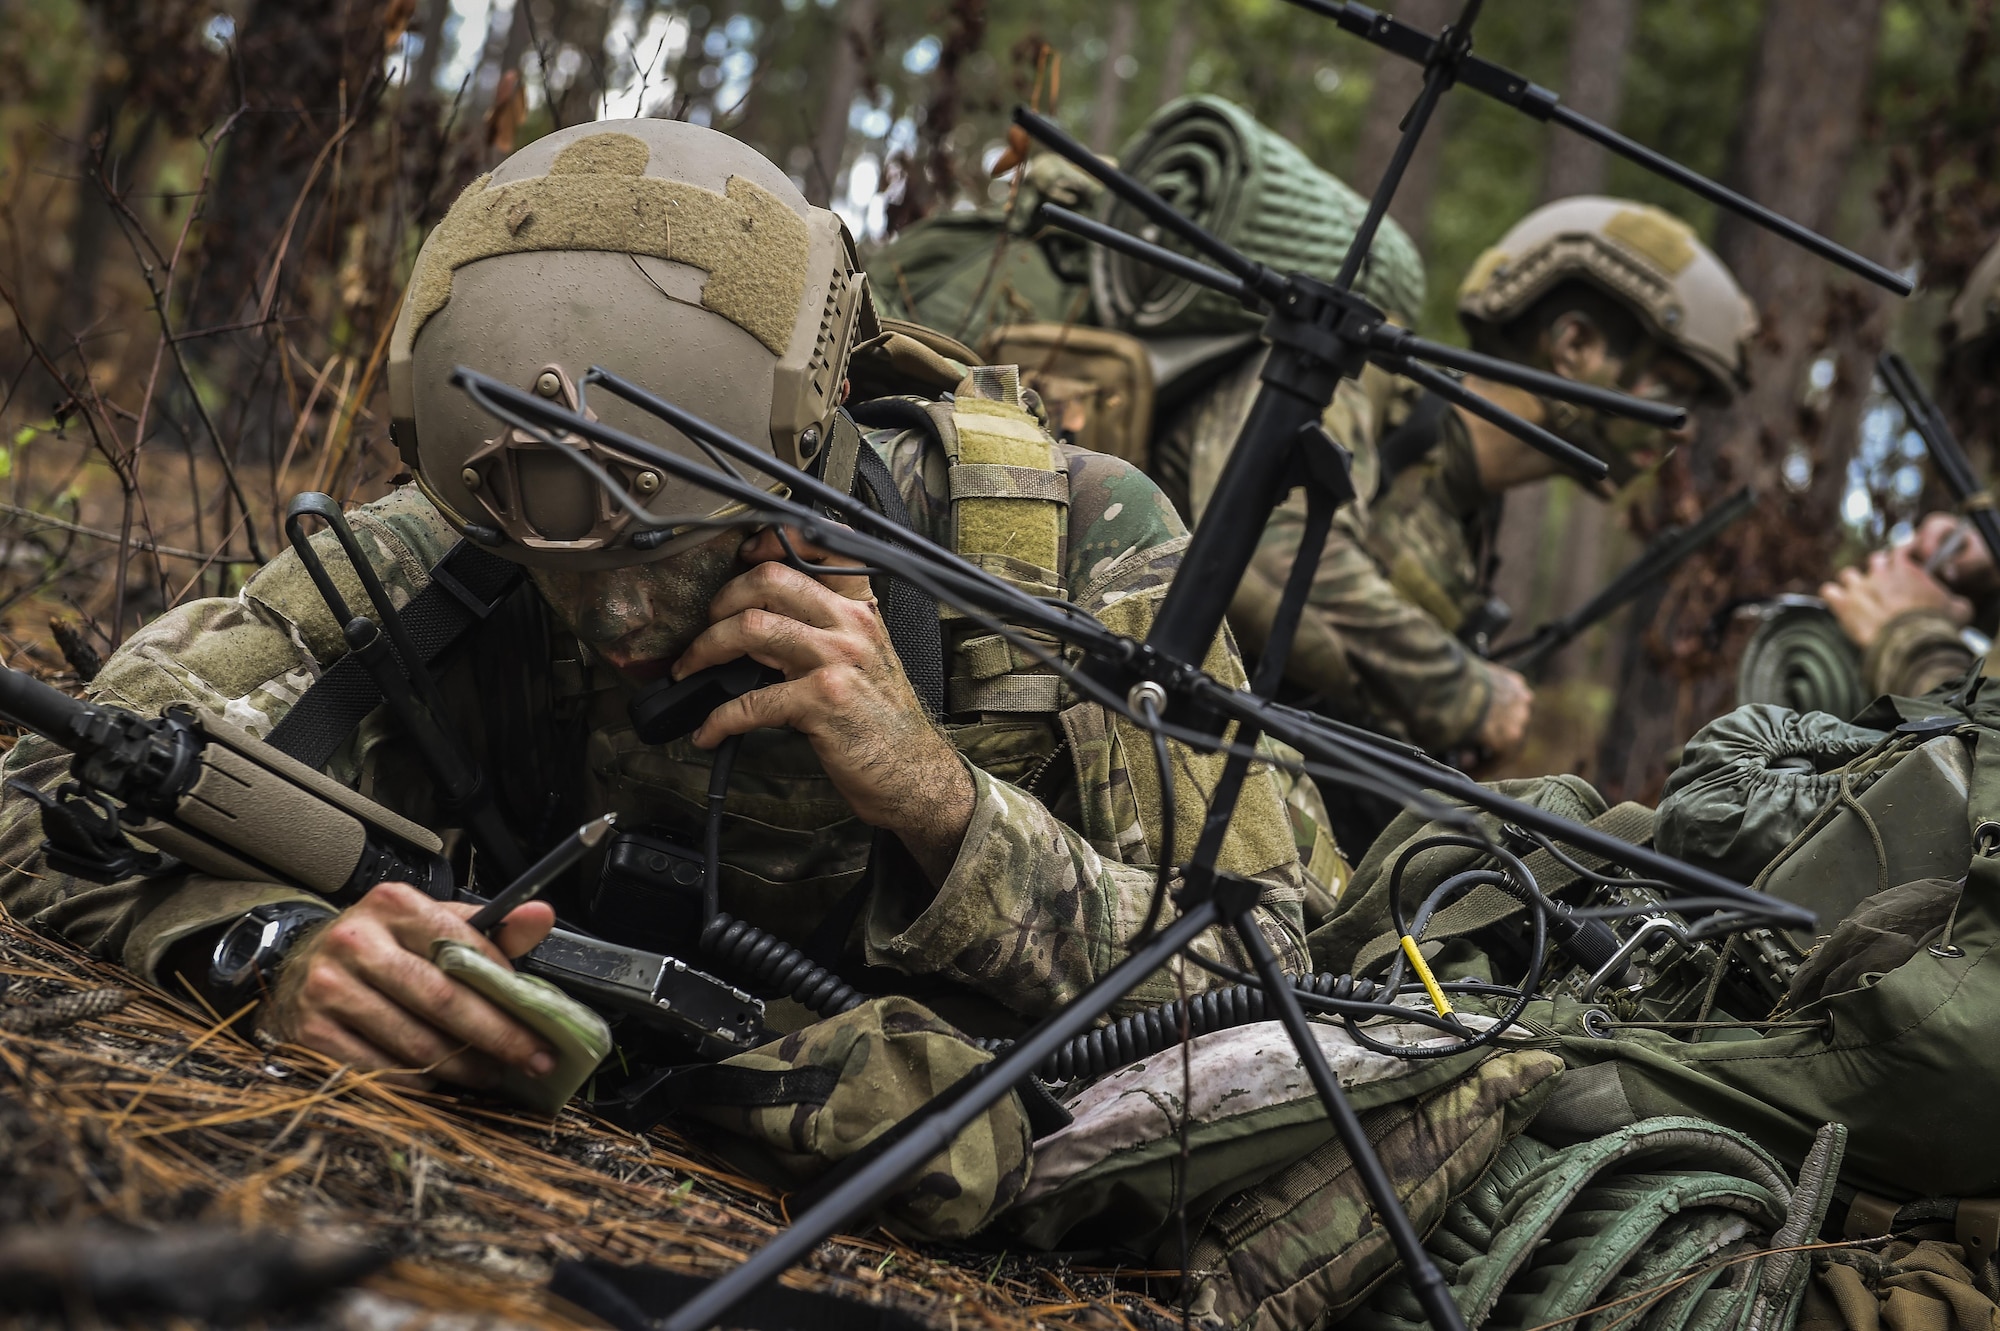 A 352nd Battlefield Airmen Training Squadron Combat Control School student radios to a simulated aircraft during a tactics field training exercise at Camp Mackall, N.C., Aug. 3, 2016. The 352nd BATS, or Combat Control School, is the home of a 13-week course that provides initial CCT qualifications. The training includes, small unit tactics, land navigation, communications, assault zones, physical training demolitions, fire support and field operations including parachuting. At the completion of this course, each graduate is awarded the three-skill level, scarlet beret and CCT flash. (U.S. Air Force photo by Senior Airman Ryan Conroy)